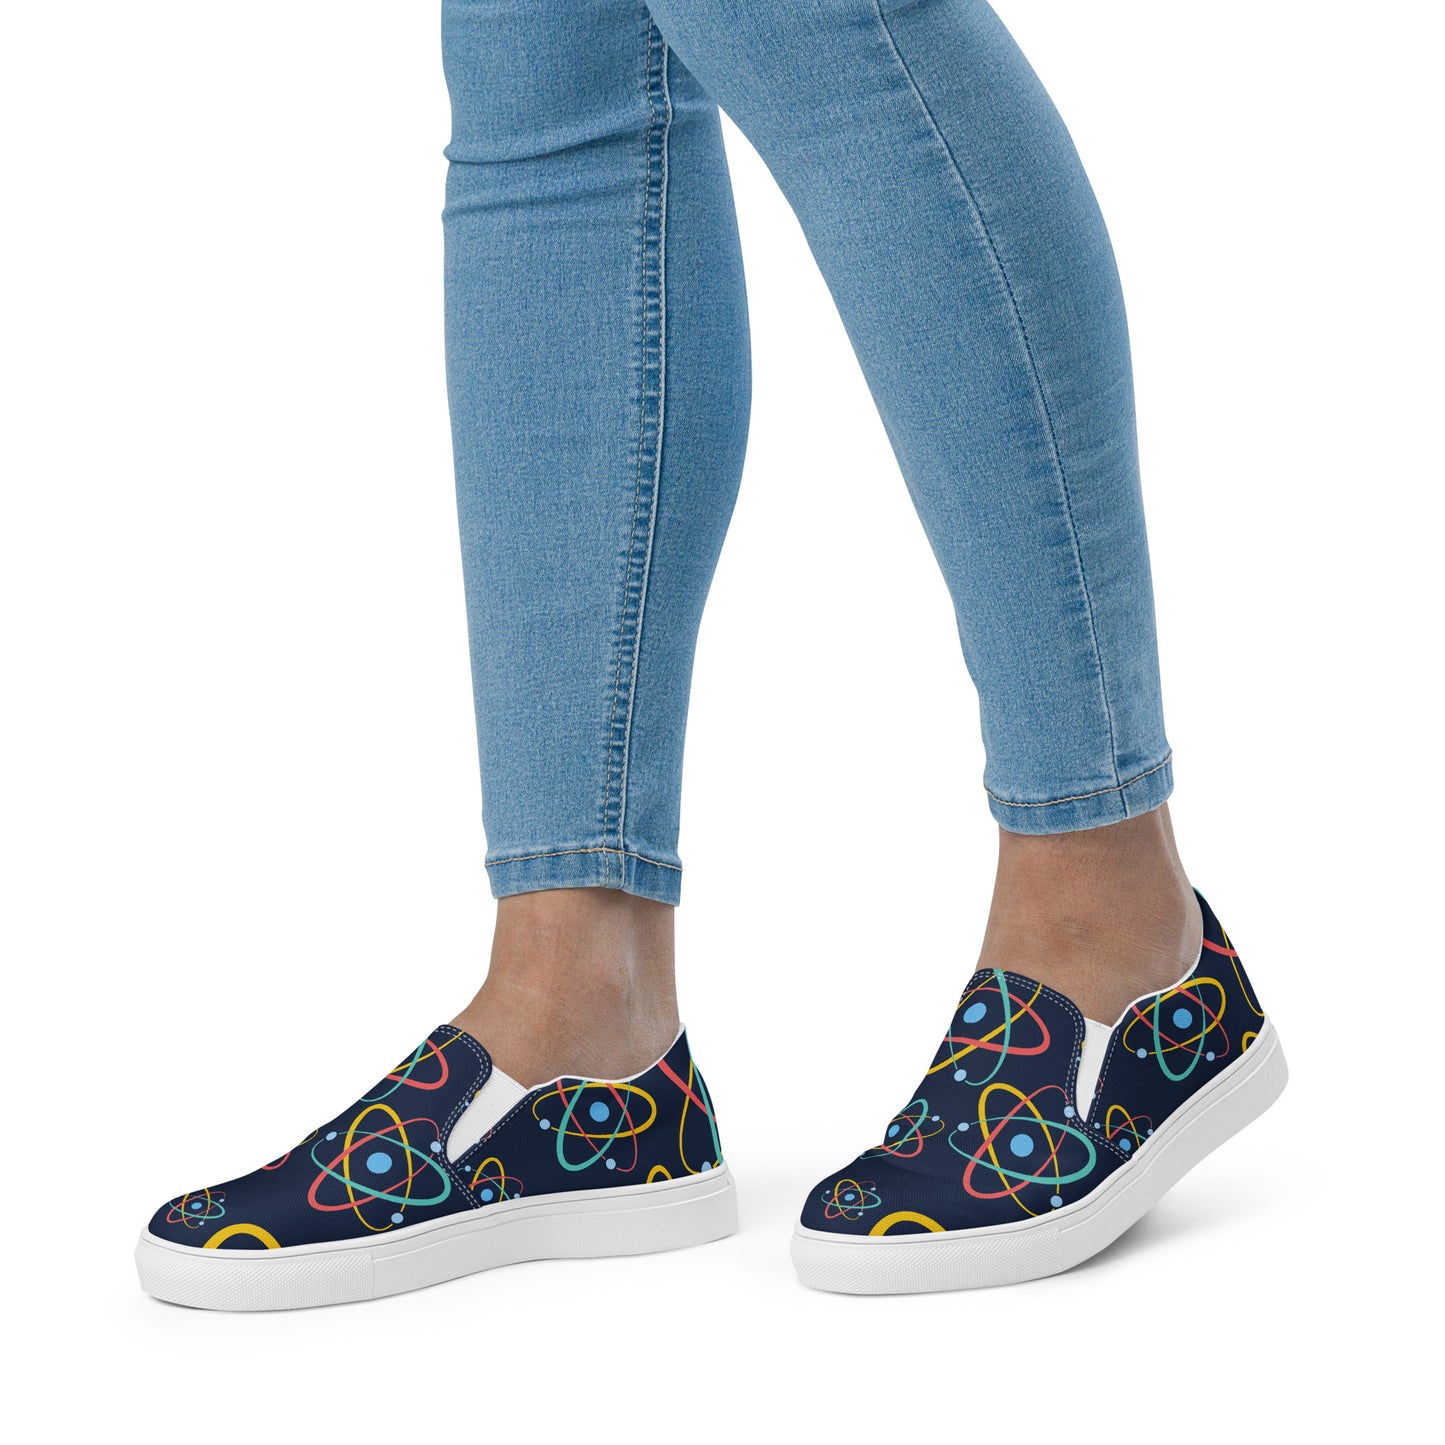 Atoms - Women’s slip-on canvas shoes Womens Slip On Shoes